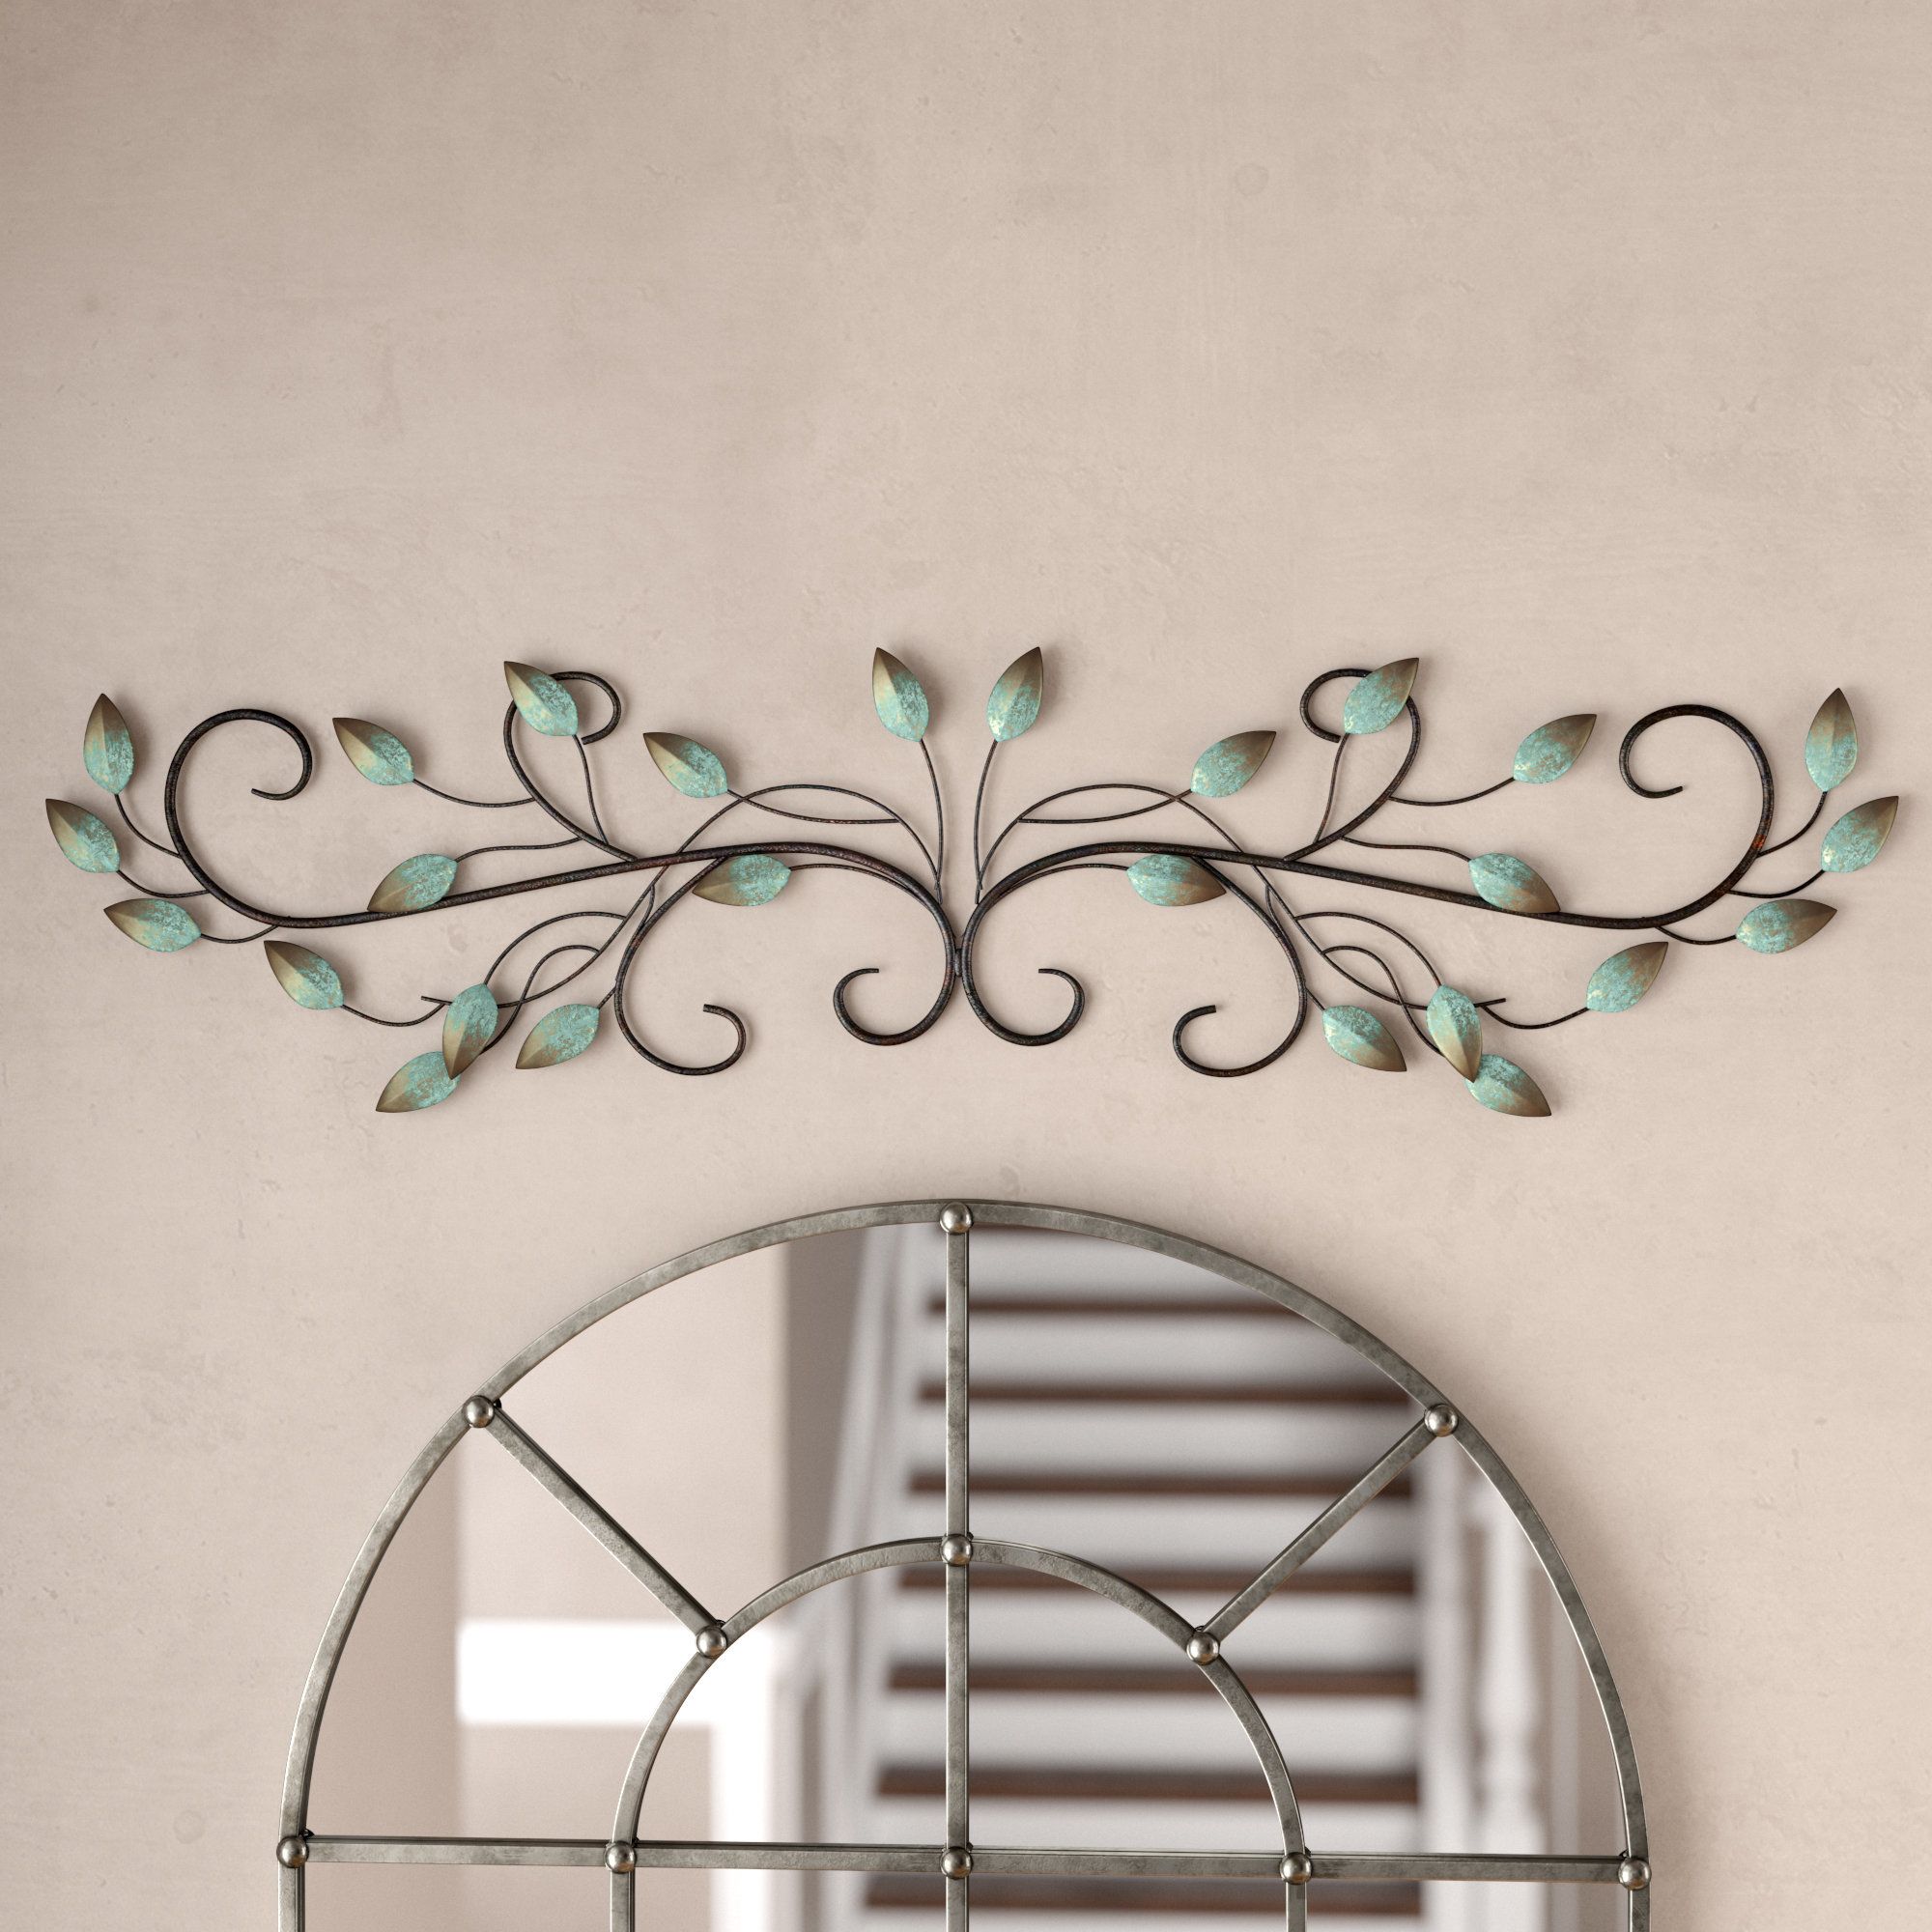 Scroll Leaf Wall Decor Intended For 2020 Fleur De Lis Living Scroll Leaf Wall Décor & Reviews (View 1 of 20)